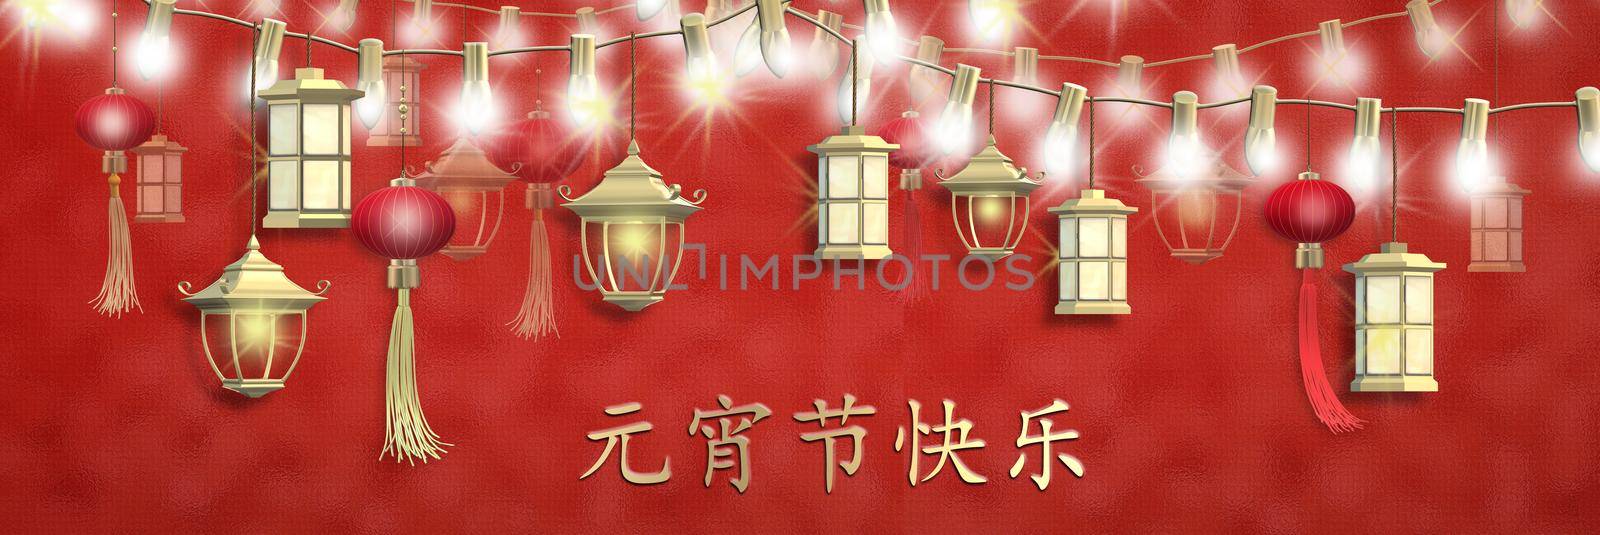 Lantern Festival, Chinese text Happy Lantern Festival. Gold text Chinese translation Happy Lantern festival. Red gold lanterns, string of lights over red. horizontal banner, place for text. 3D render